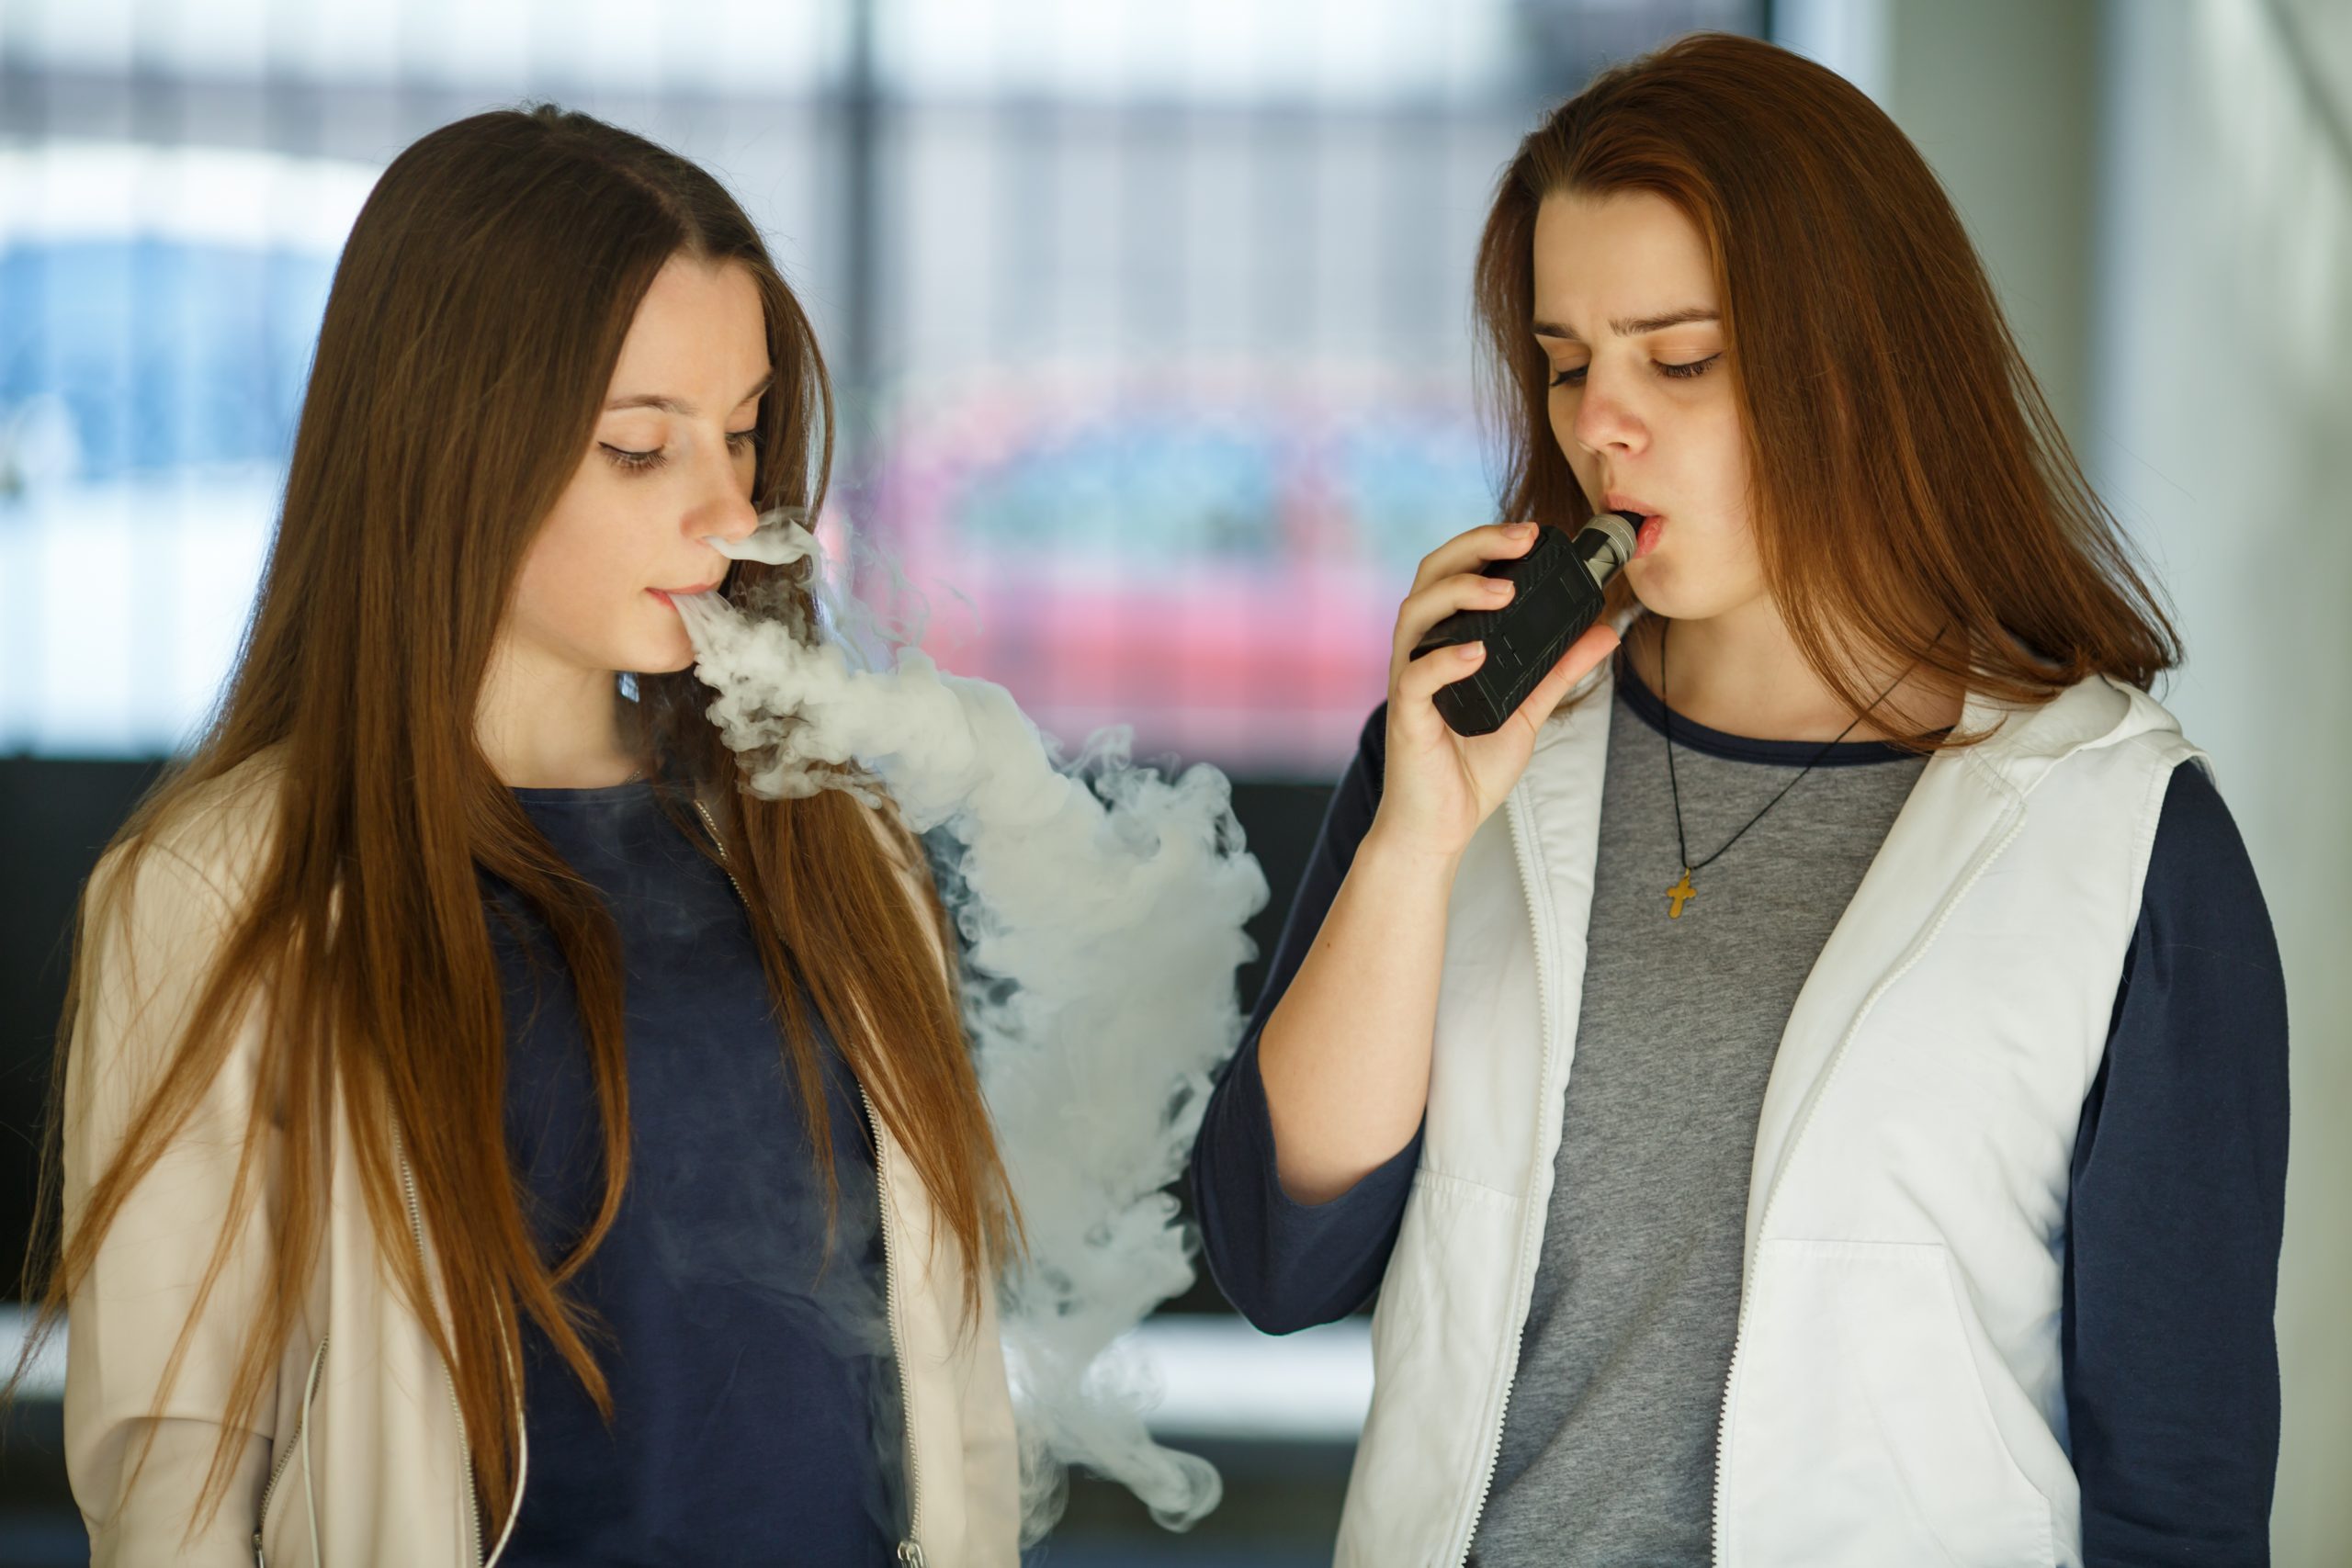 Independent retailers back government’s crackdown on vape marketing